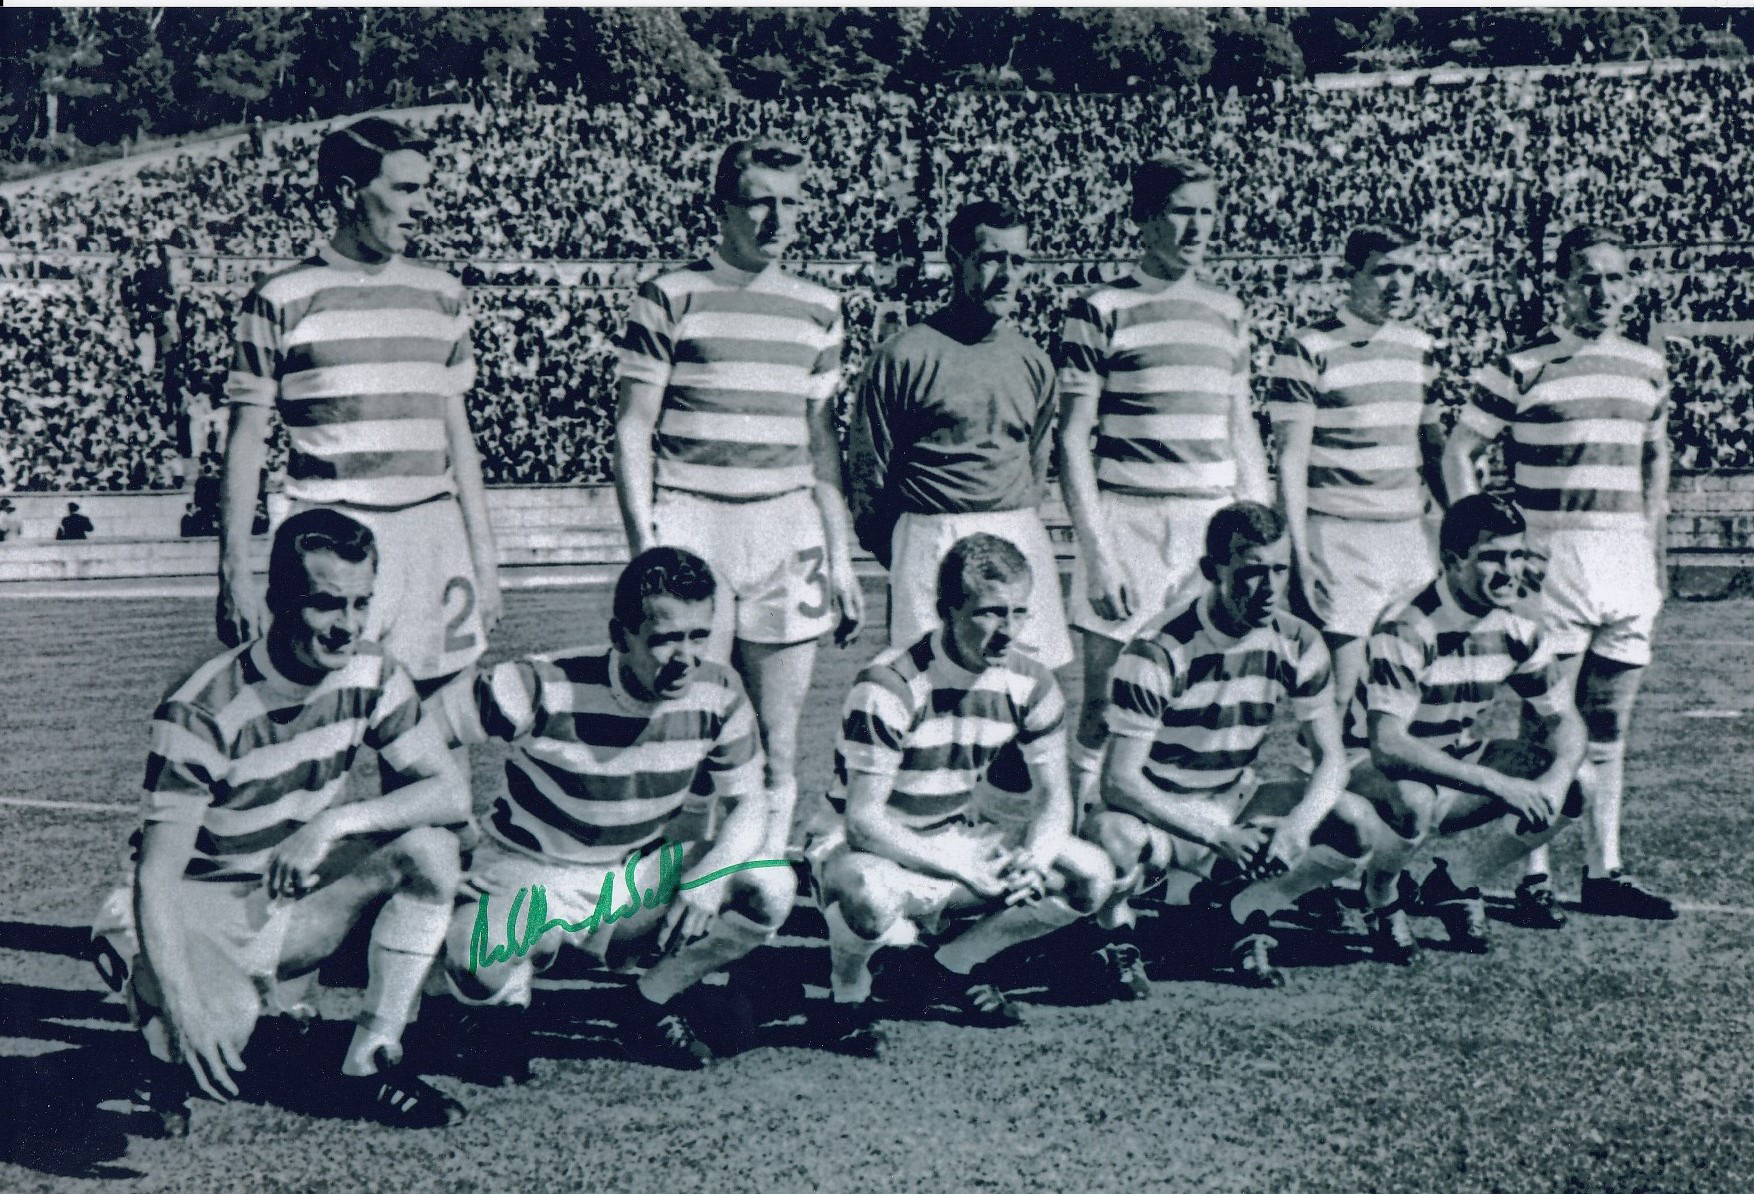 Autographed WILLIE WALLACE 12 x 8 photo - B/W, depicting Celtic players including striker WILLIE